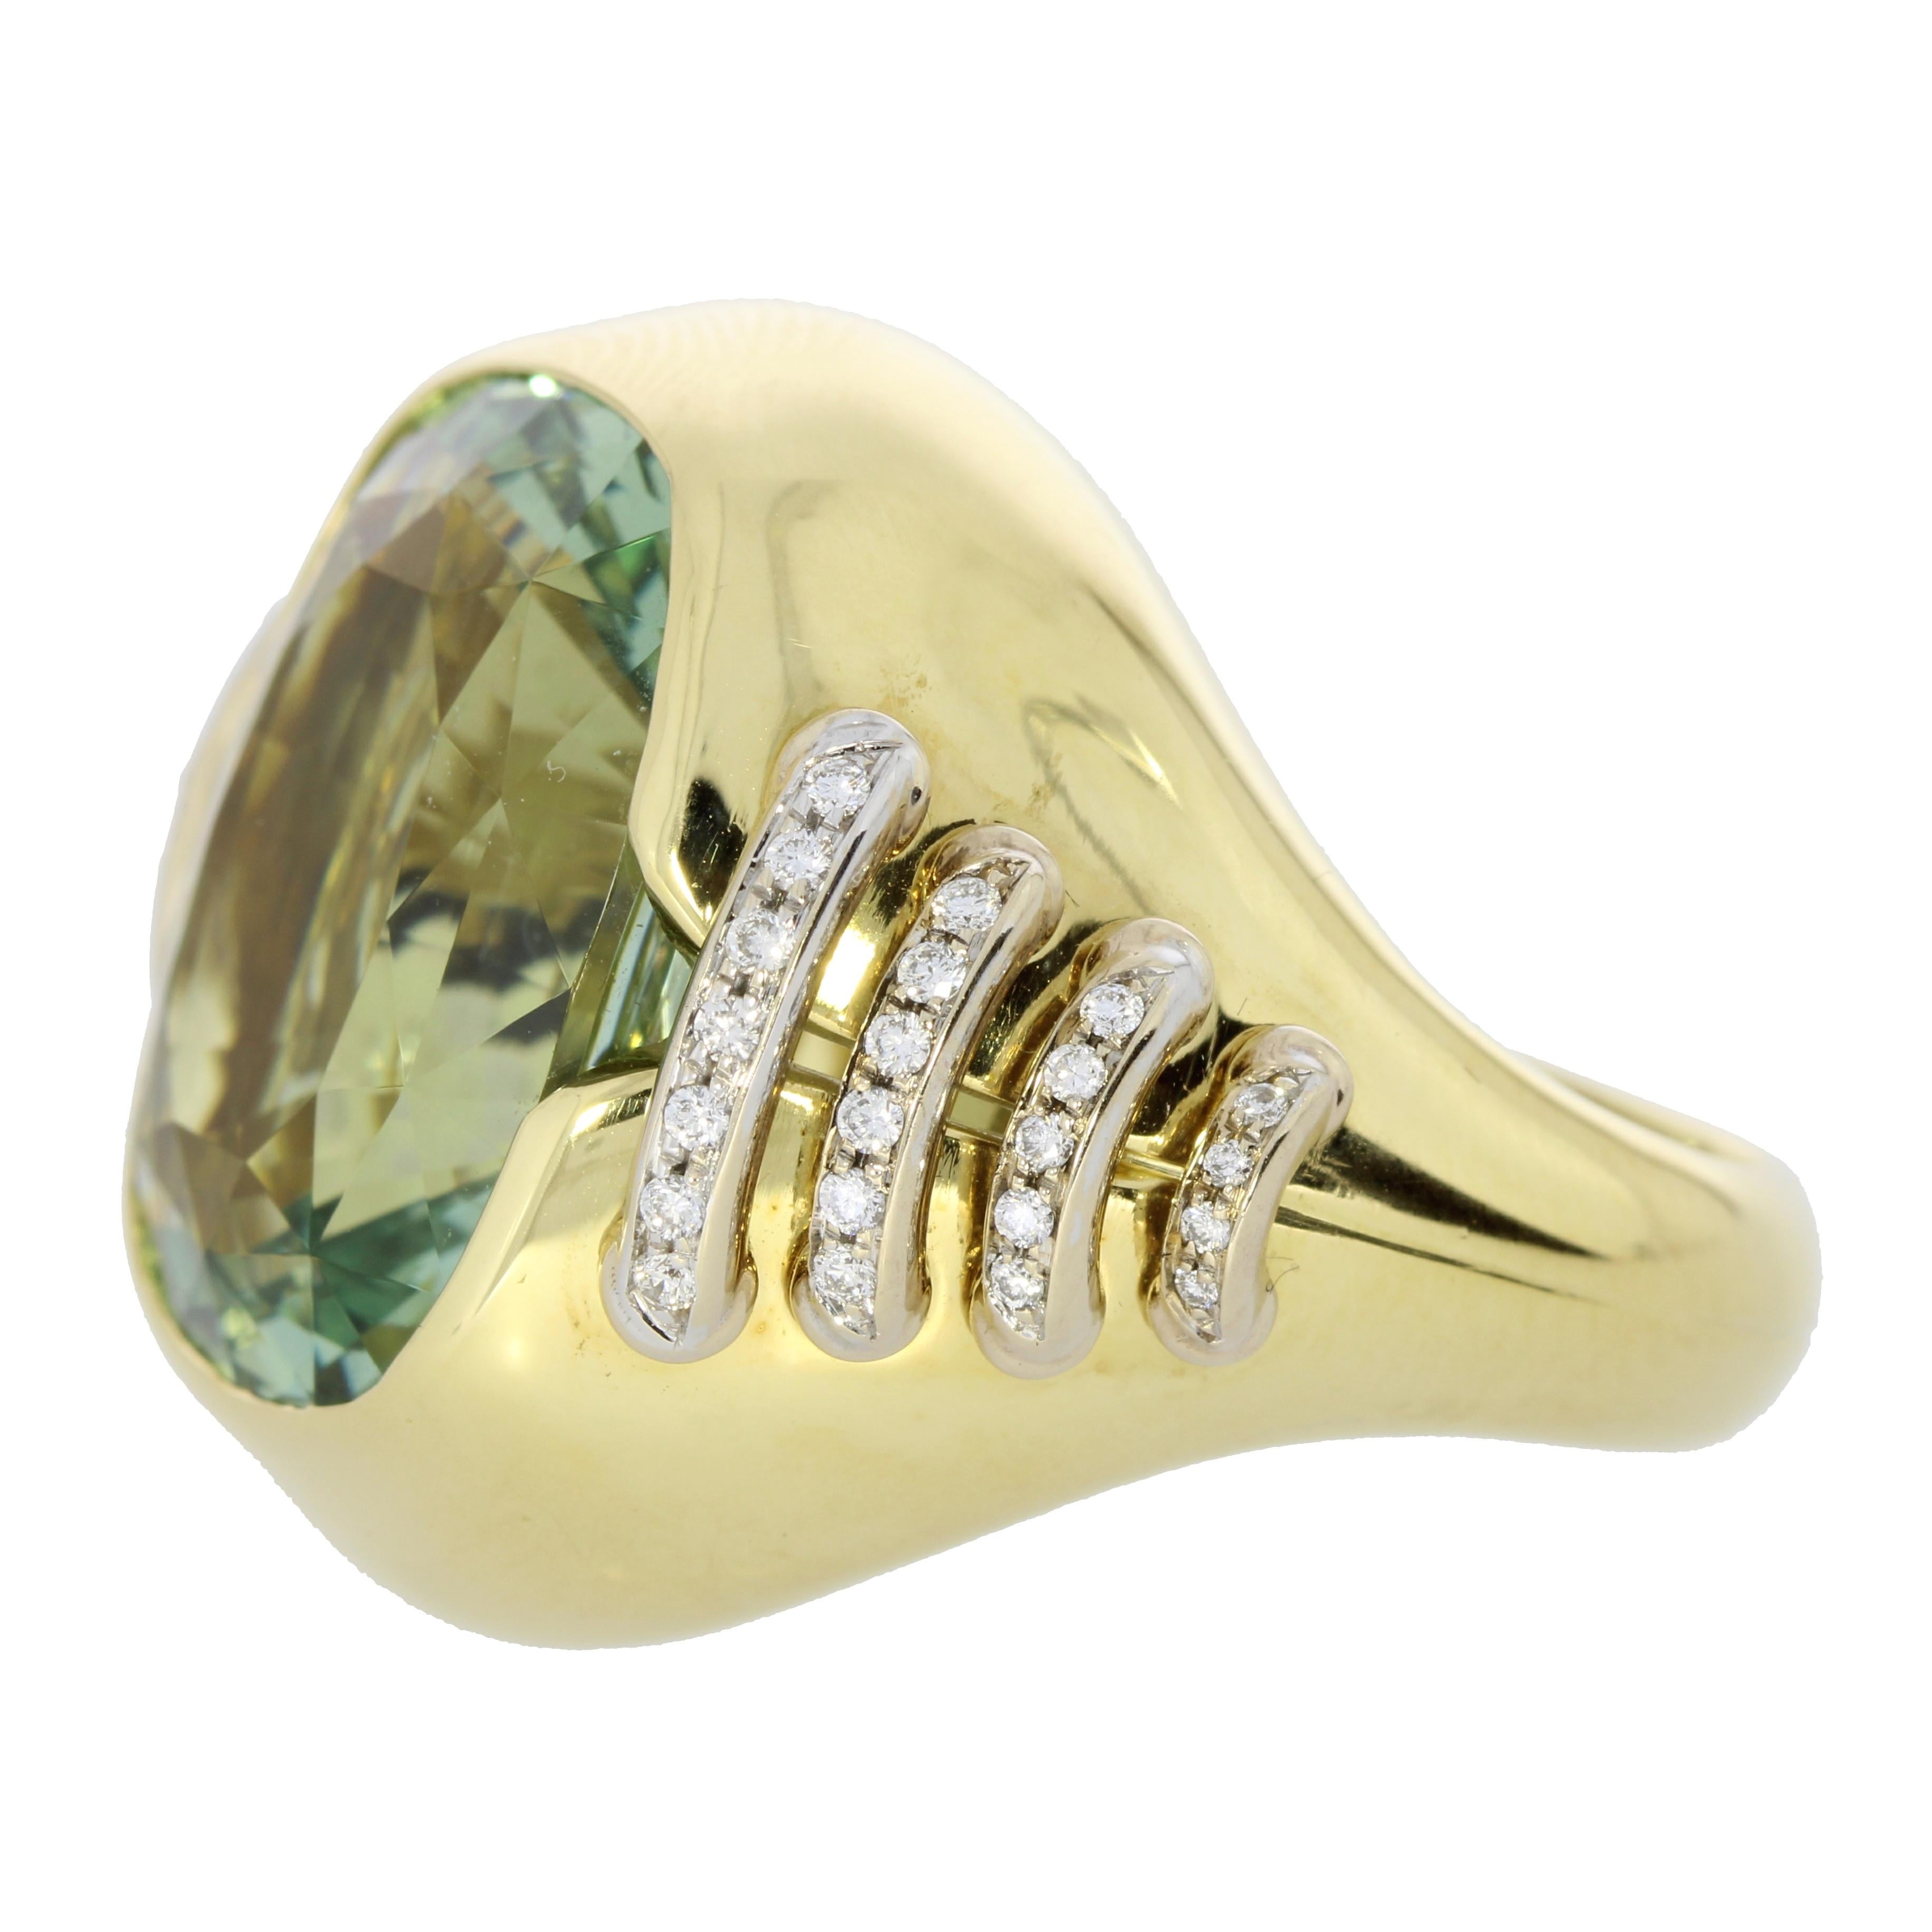 A stunning green aquamarine mounted in a contemporary cocktail ring held together by diamond laces crating a contemporary piece of art.

This Jewel is One of a Kind.

Details
- 18 karat Yellow Gold
- 14.08 carat Green Aquaqmarine
- 0.45 carat